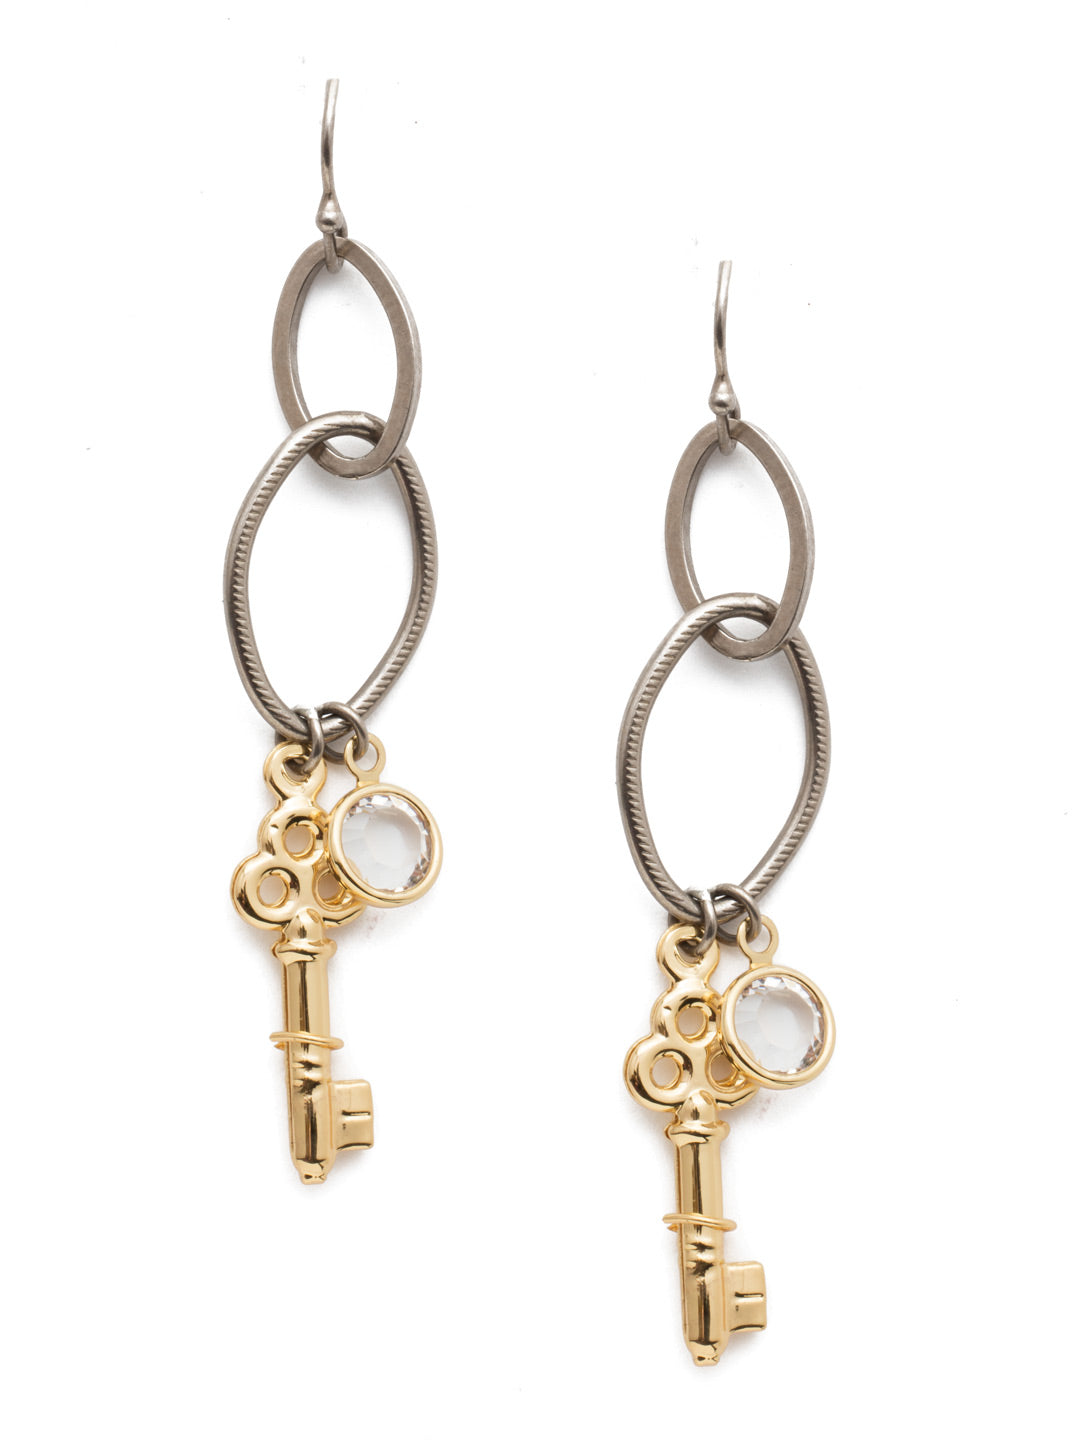 Cassidy Dangle Earrings - 4EET91MXCRY - <p>Soldered metal loop: check. Embossed metal hoop: check. Lock charm and an irredescent gem: check. The Cassidy Dangle Earrings are a fun pair that check all of the trend boxes. From Sorrelli's Crystal collection in our Mixed Metal finish.</p>